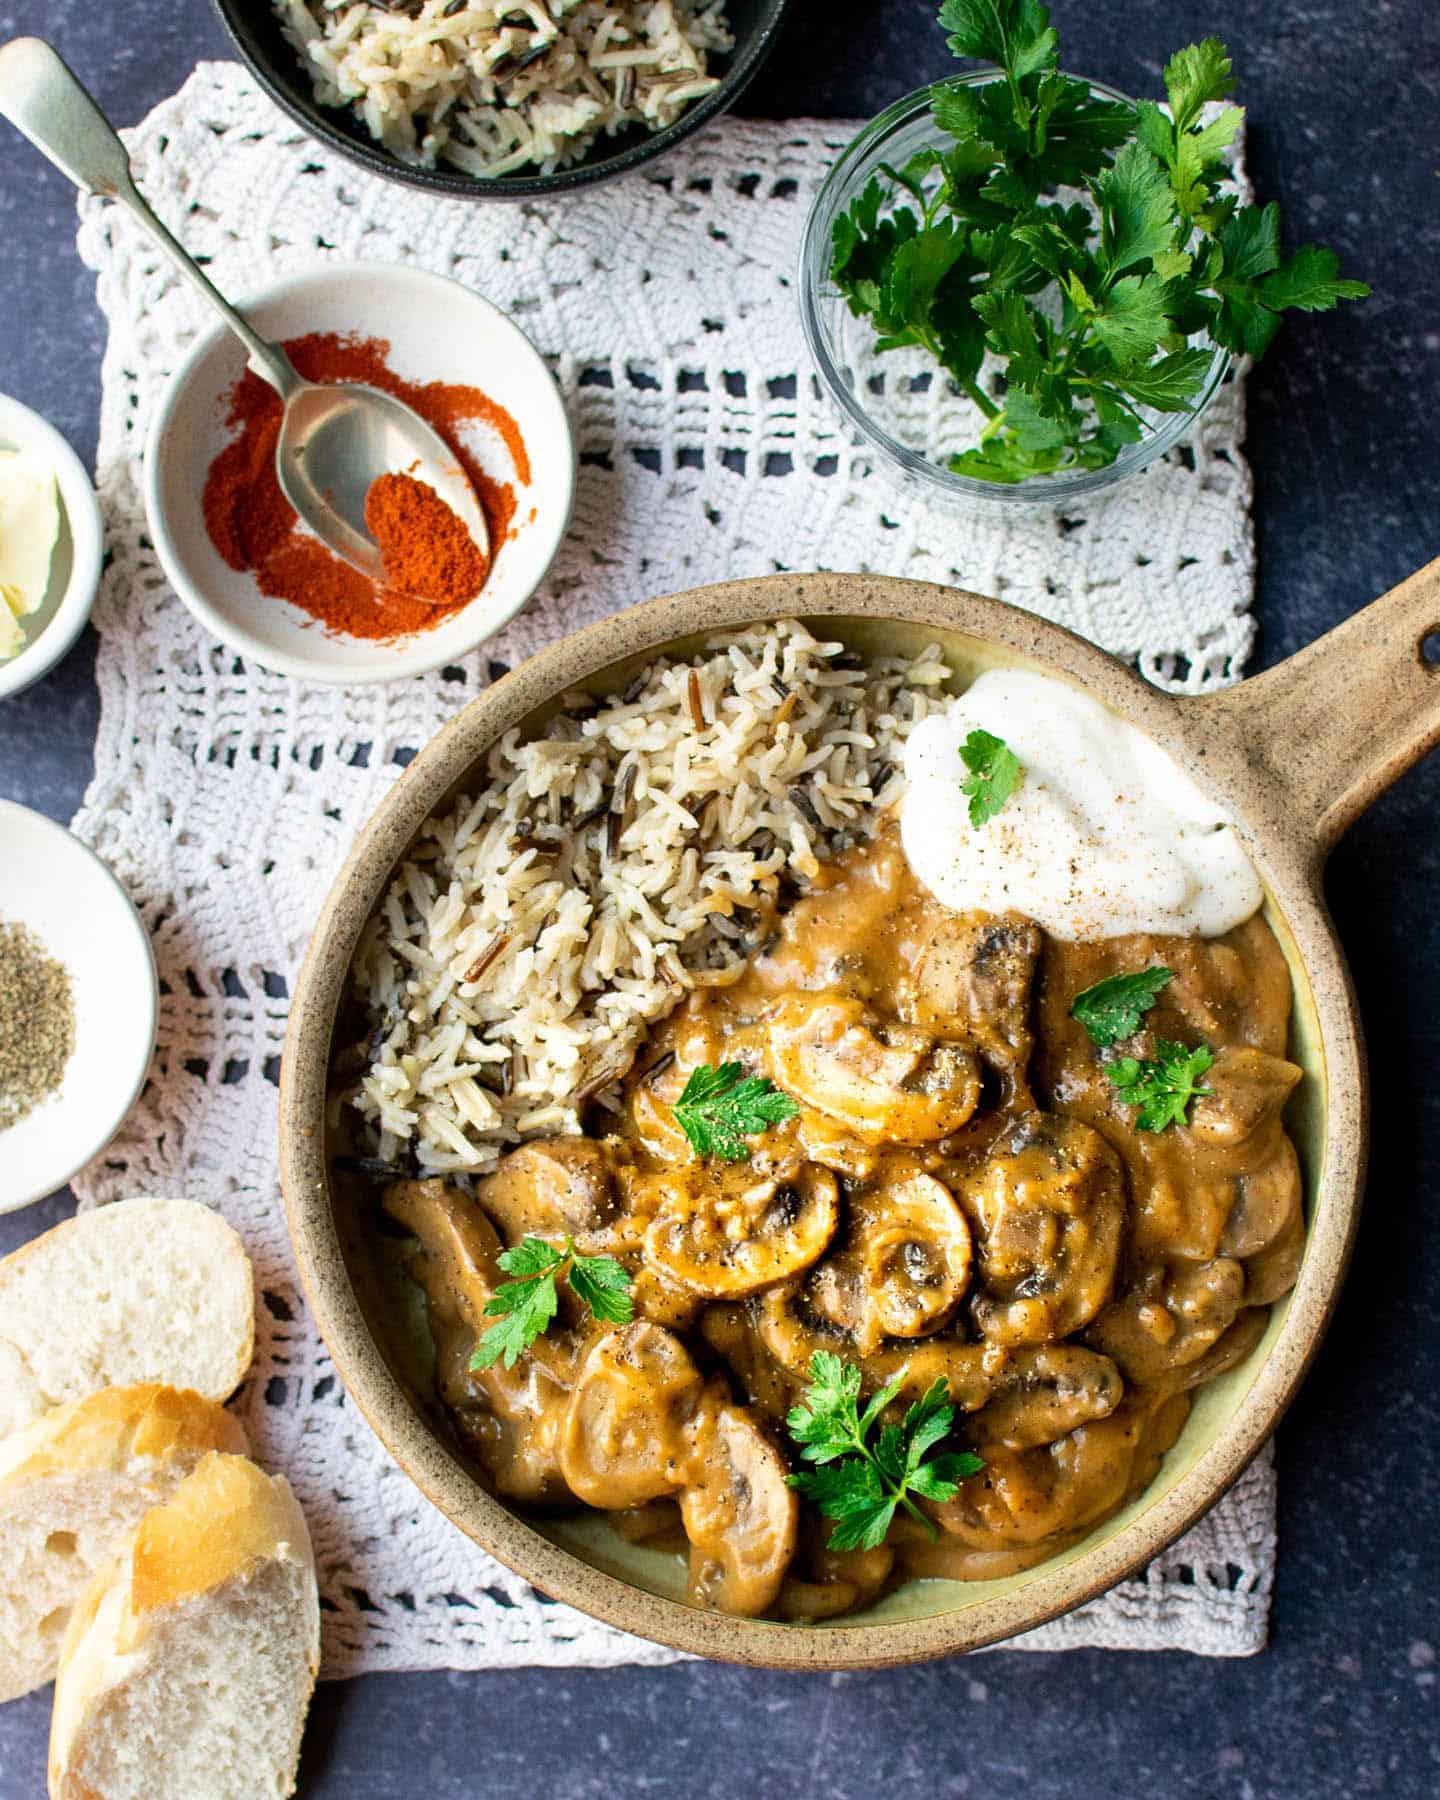 An earthenware bowl of mushroom stroganoff, served with wild rice and a dollop of vegan creme fraiche